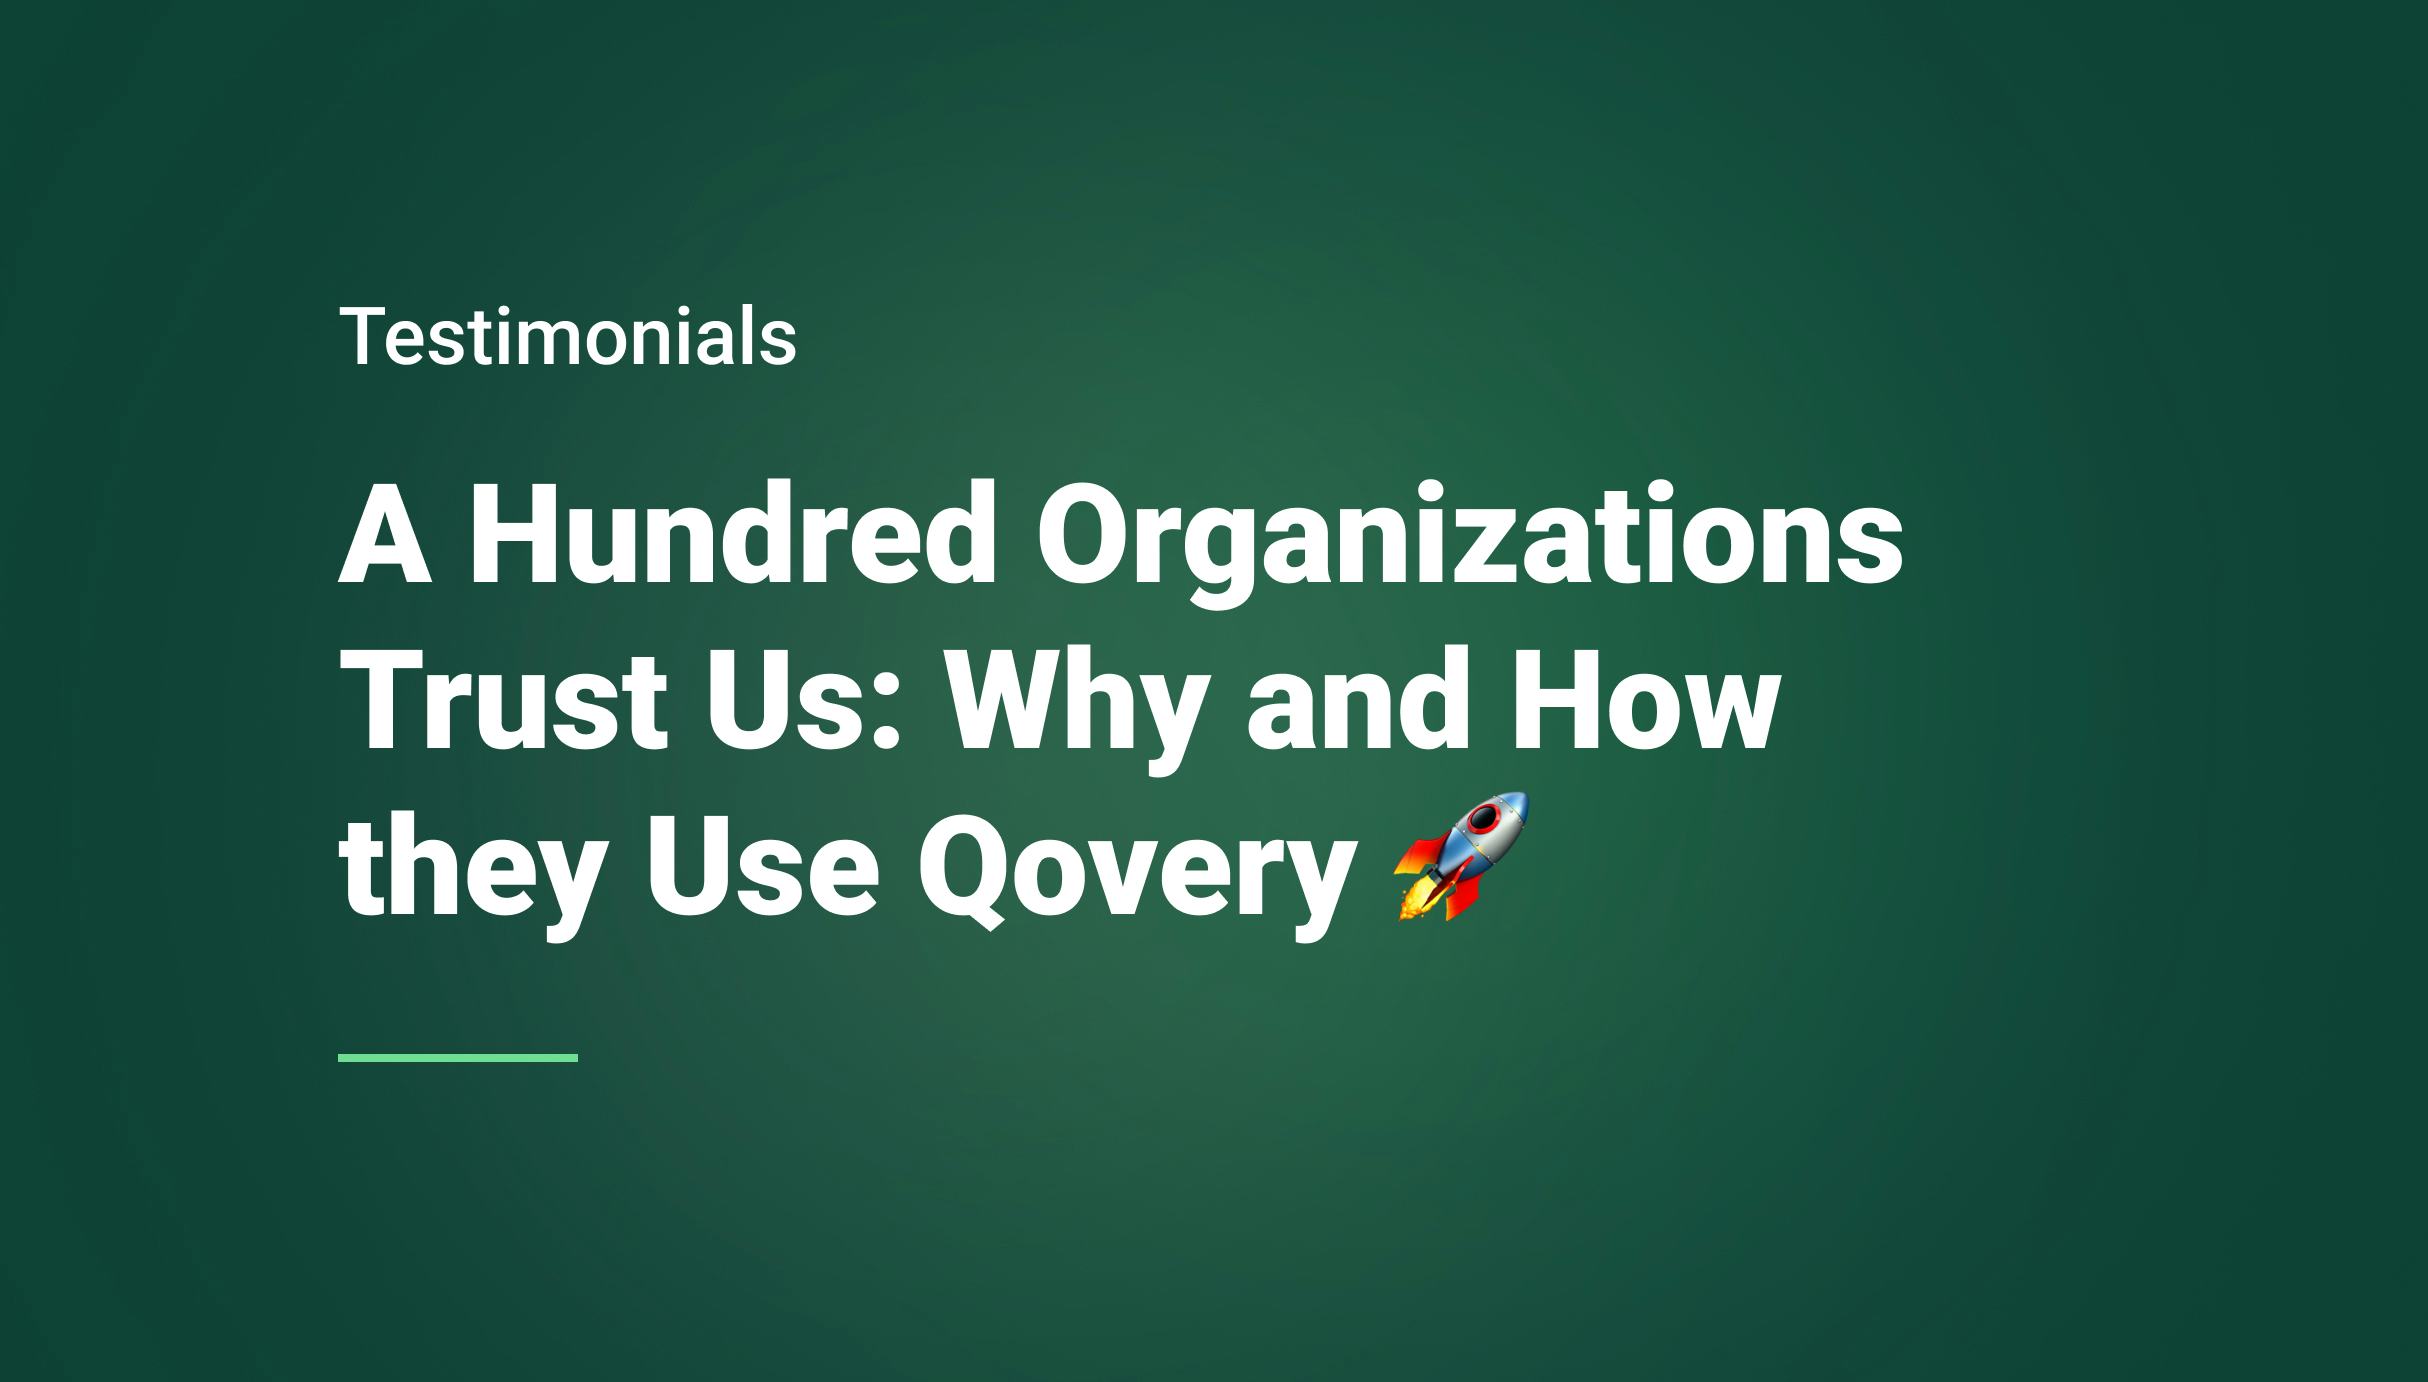 A Hundred Organizations Trust Us: Why and How they Use Qovery